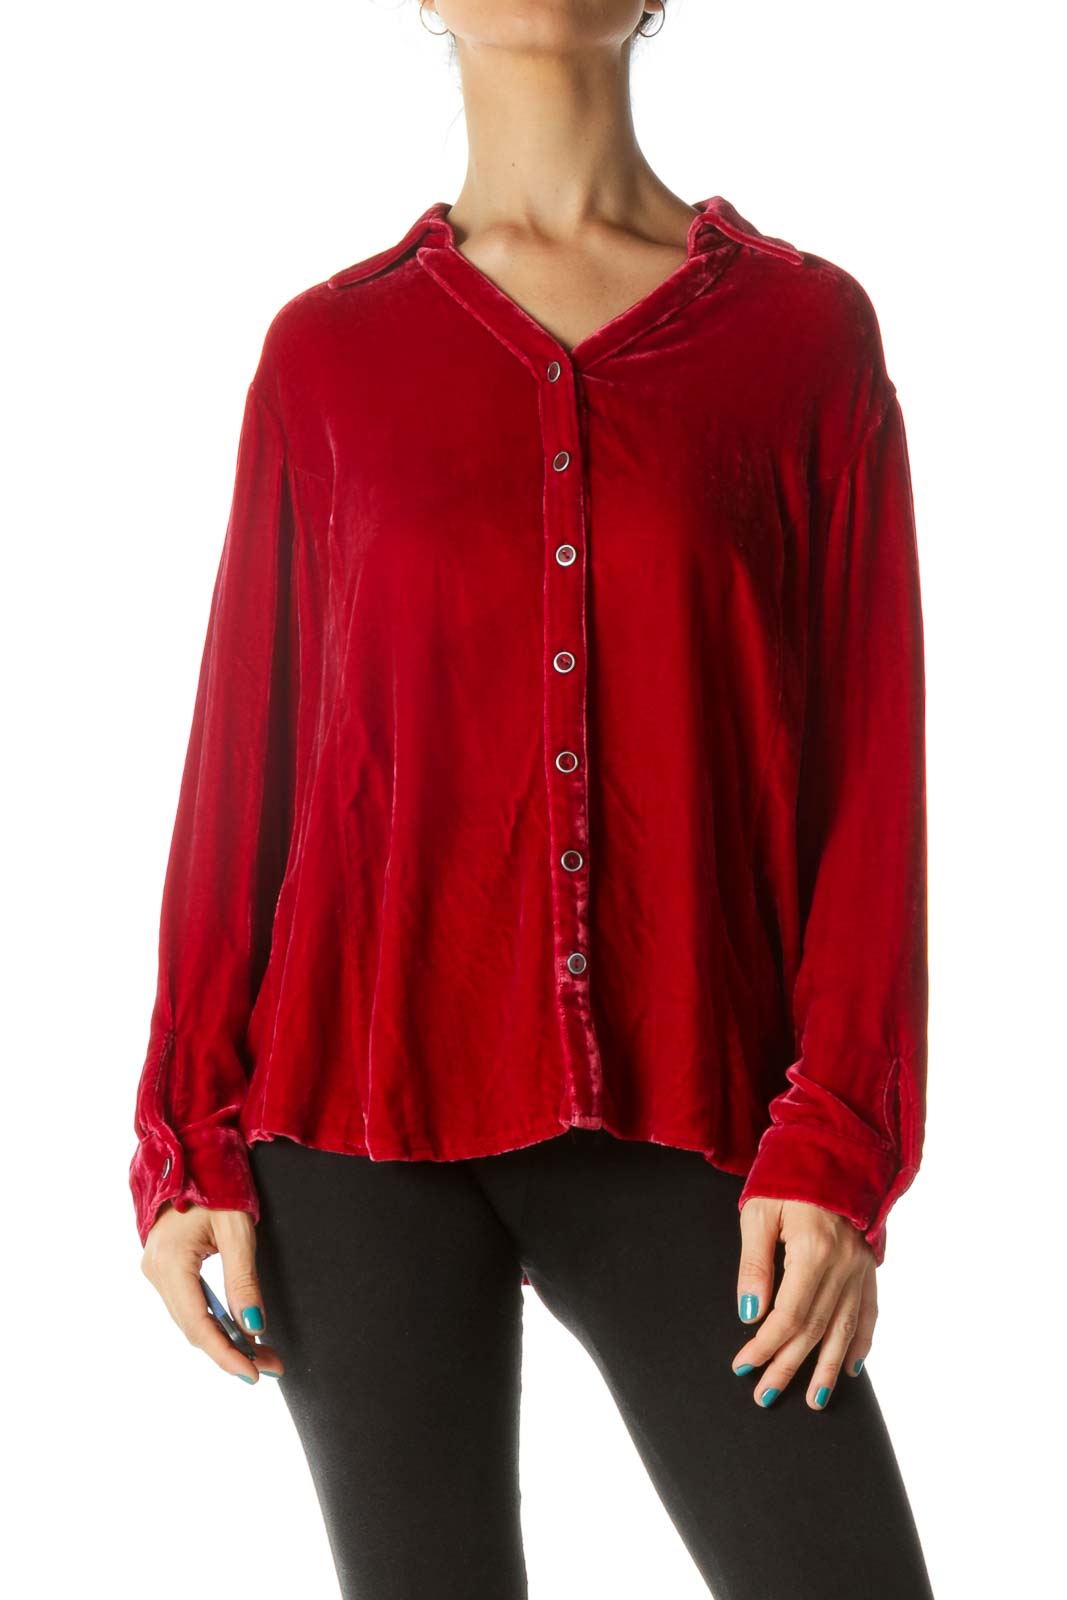 Coldwater Creek - Red Velvet Collared Button-Up Blouse Rayon Silk ...